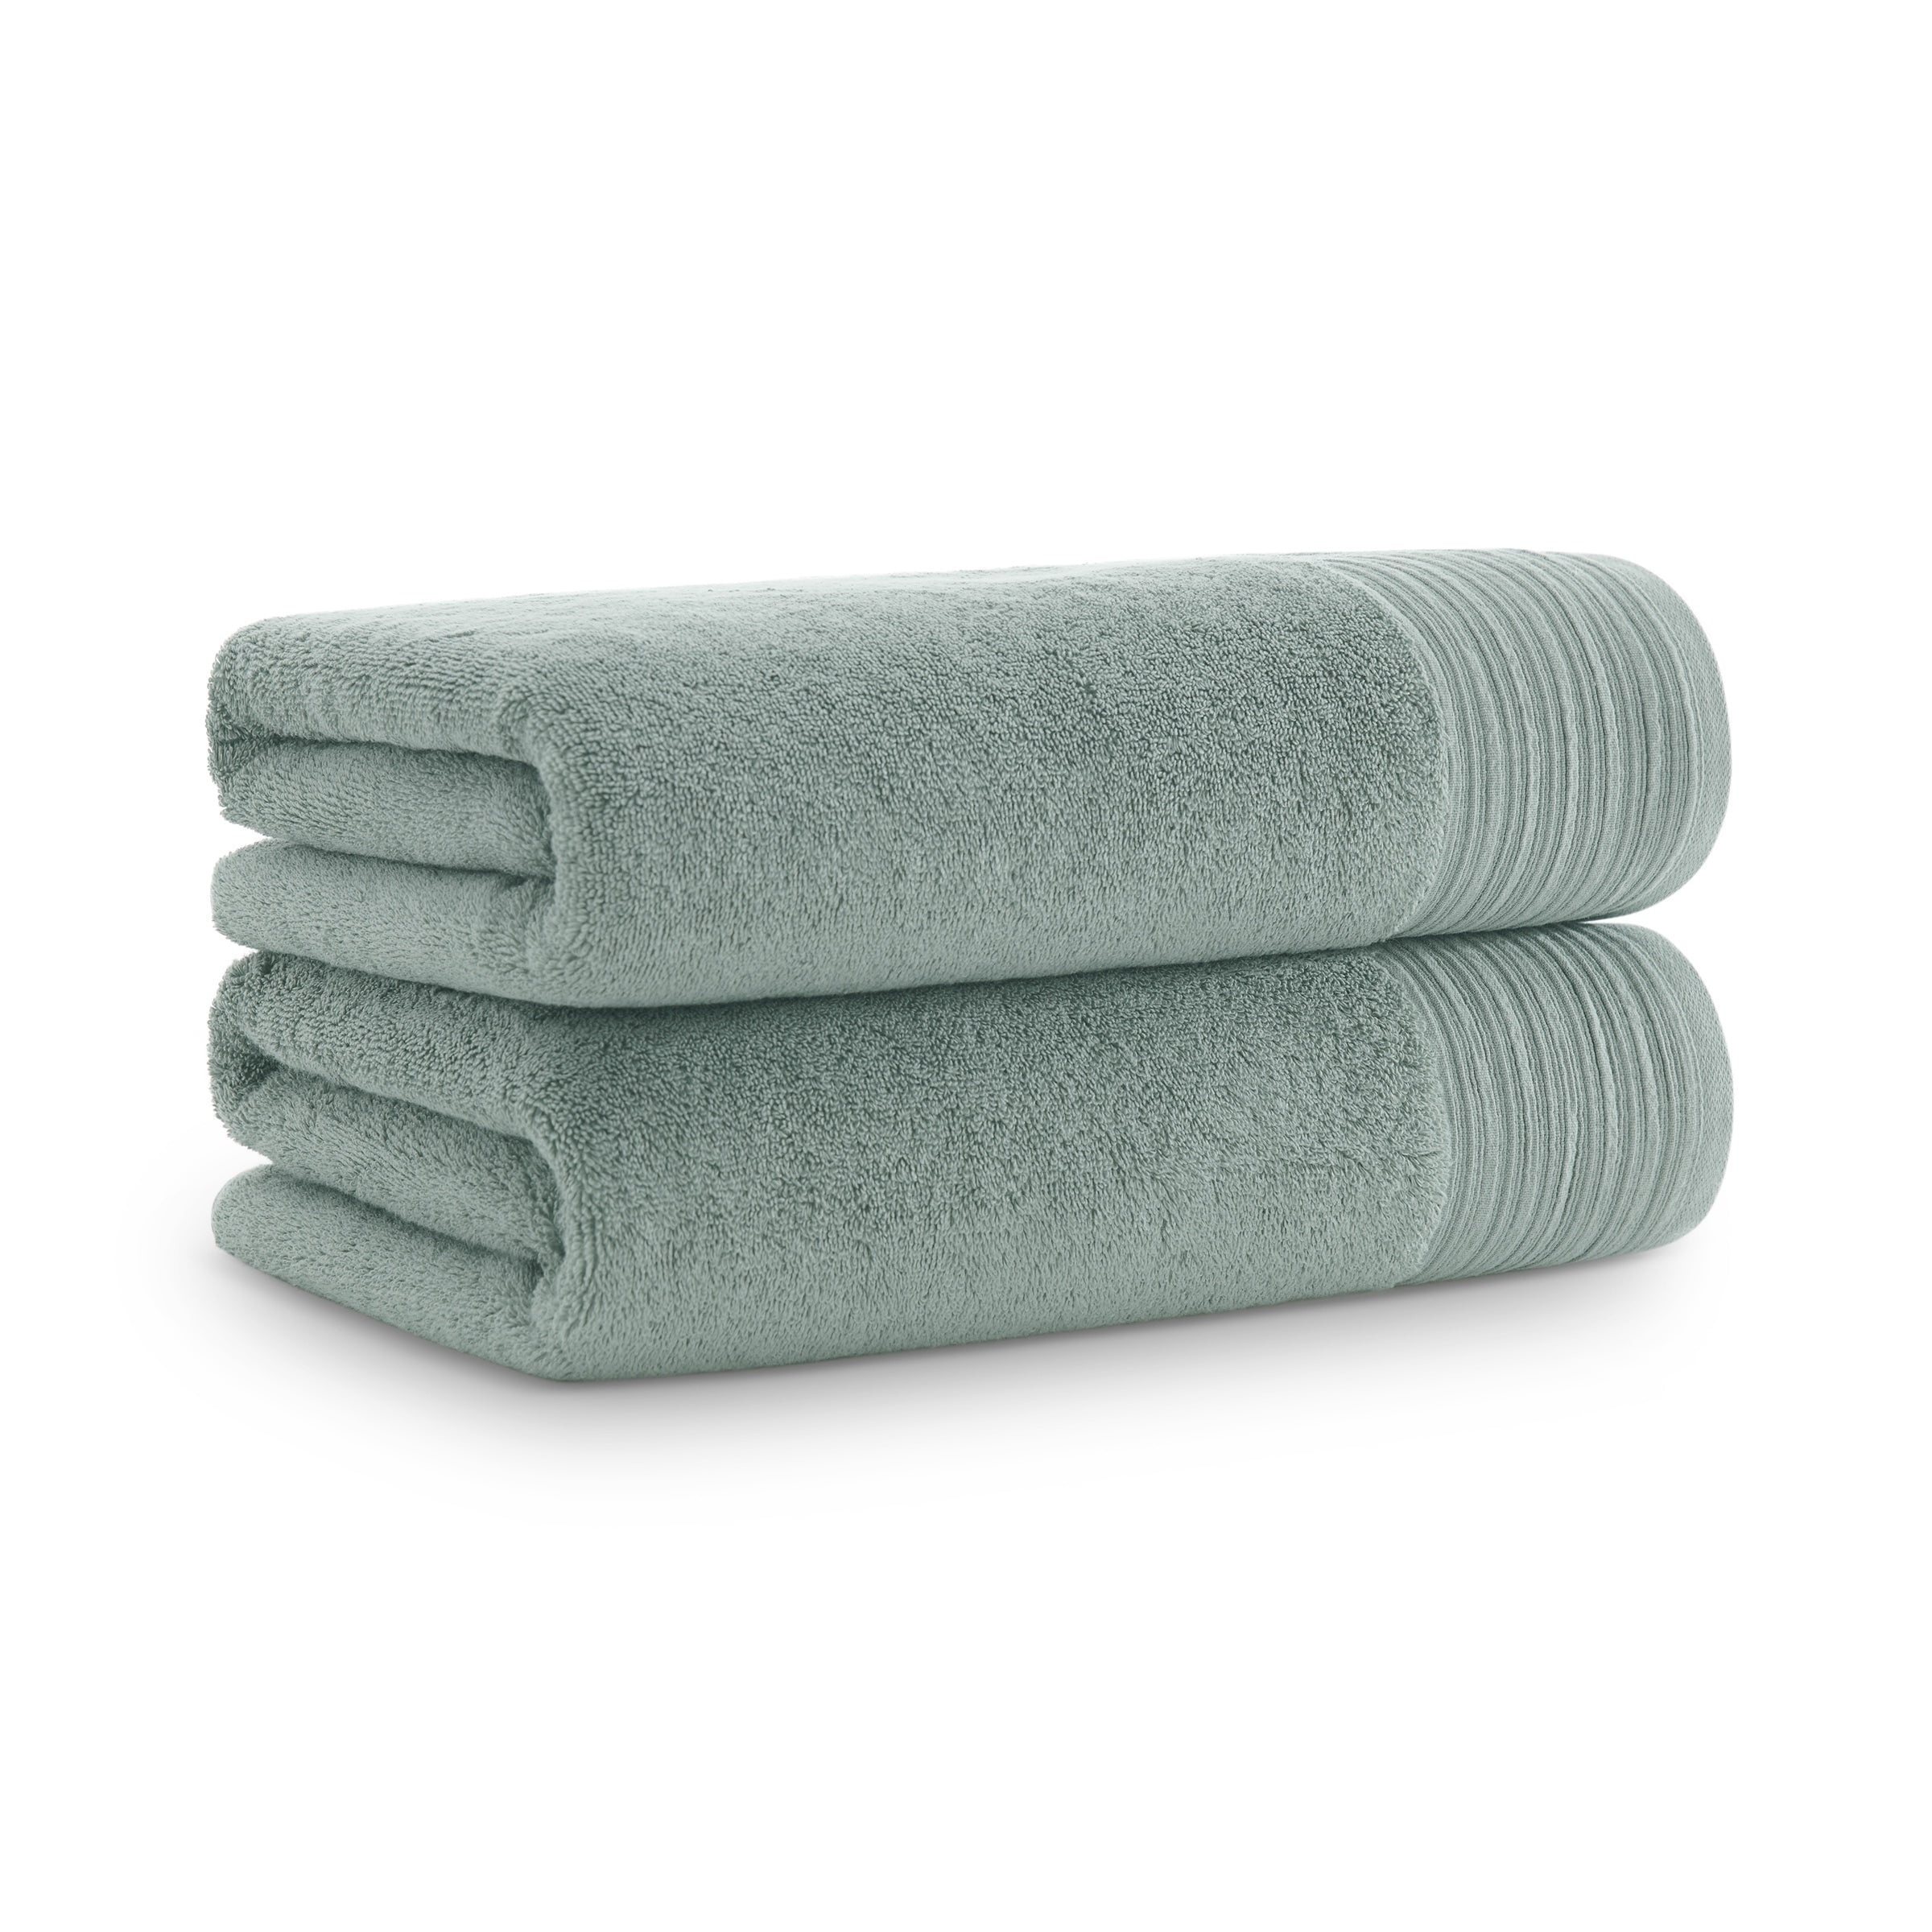 Aston and Arden Anatolia Turkish Bath Towels (2 Pack), 30x60, 600 gsm, Woven Linen-Inspired Dobby, Ring Spun Combed, Green